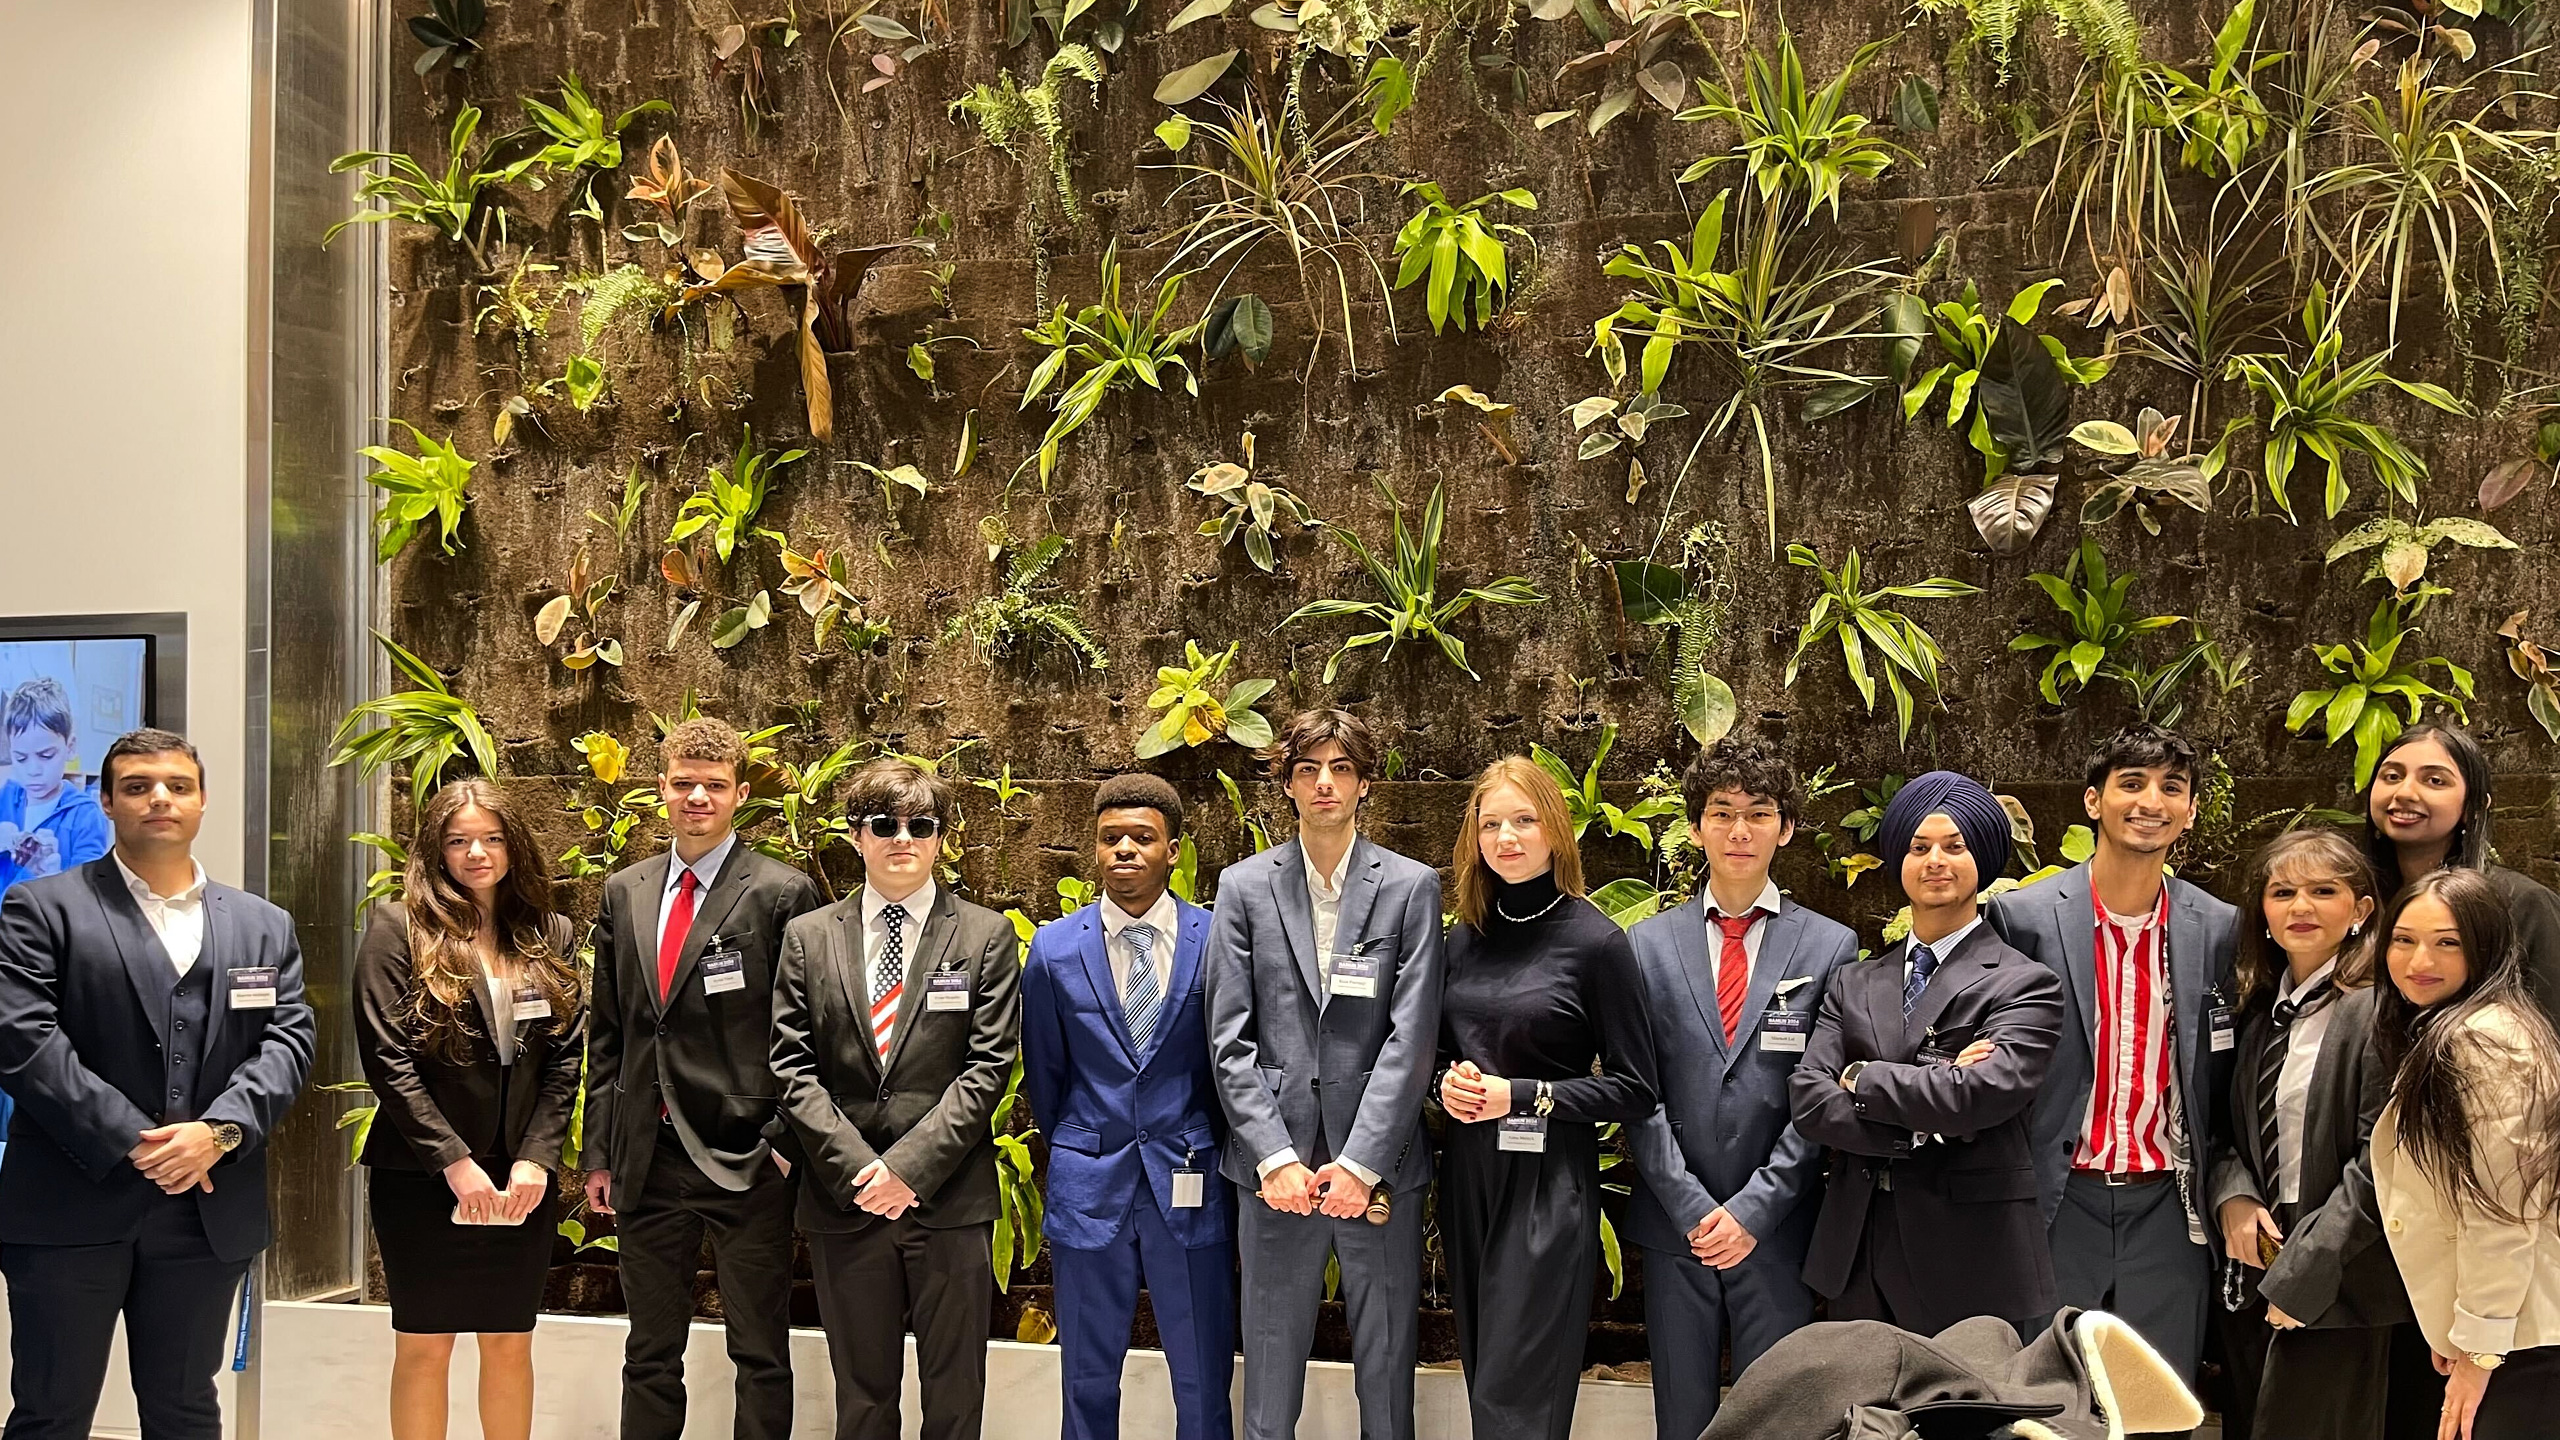 Group of people standing in front of a plant wall